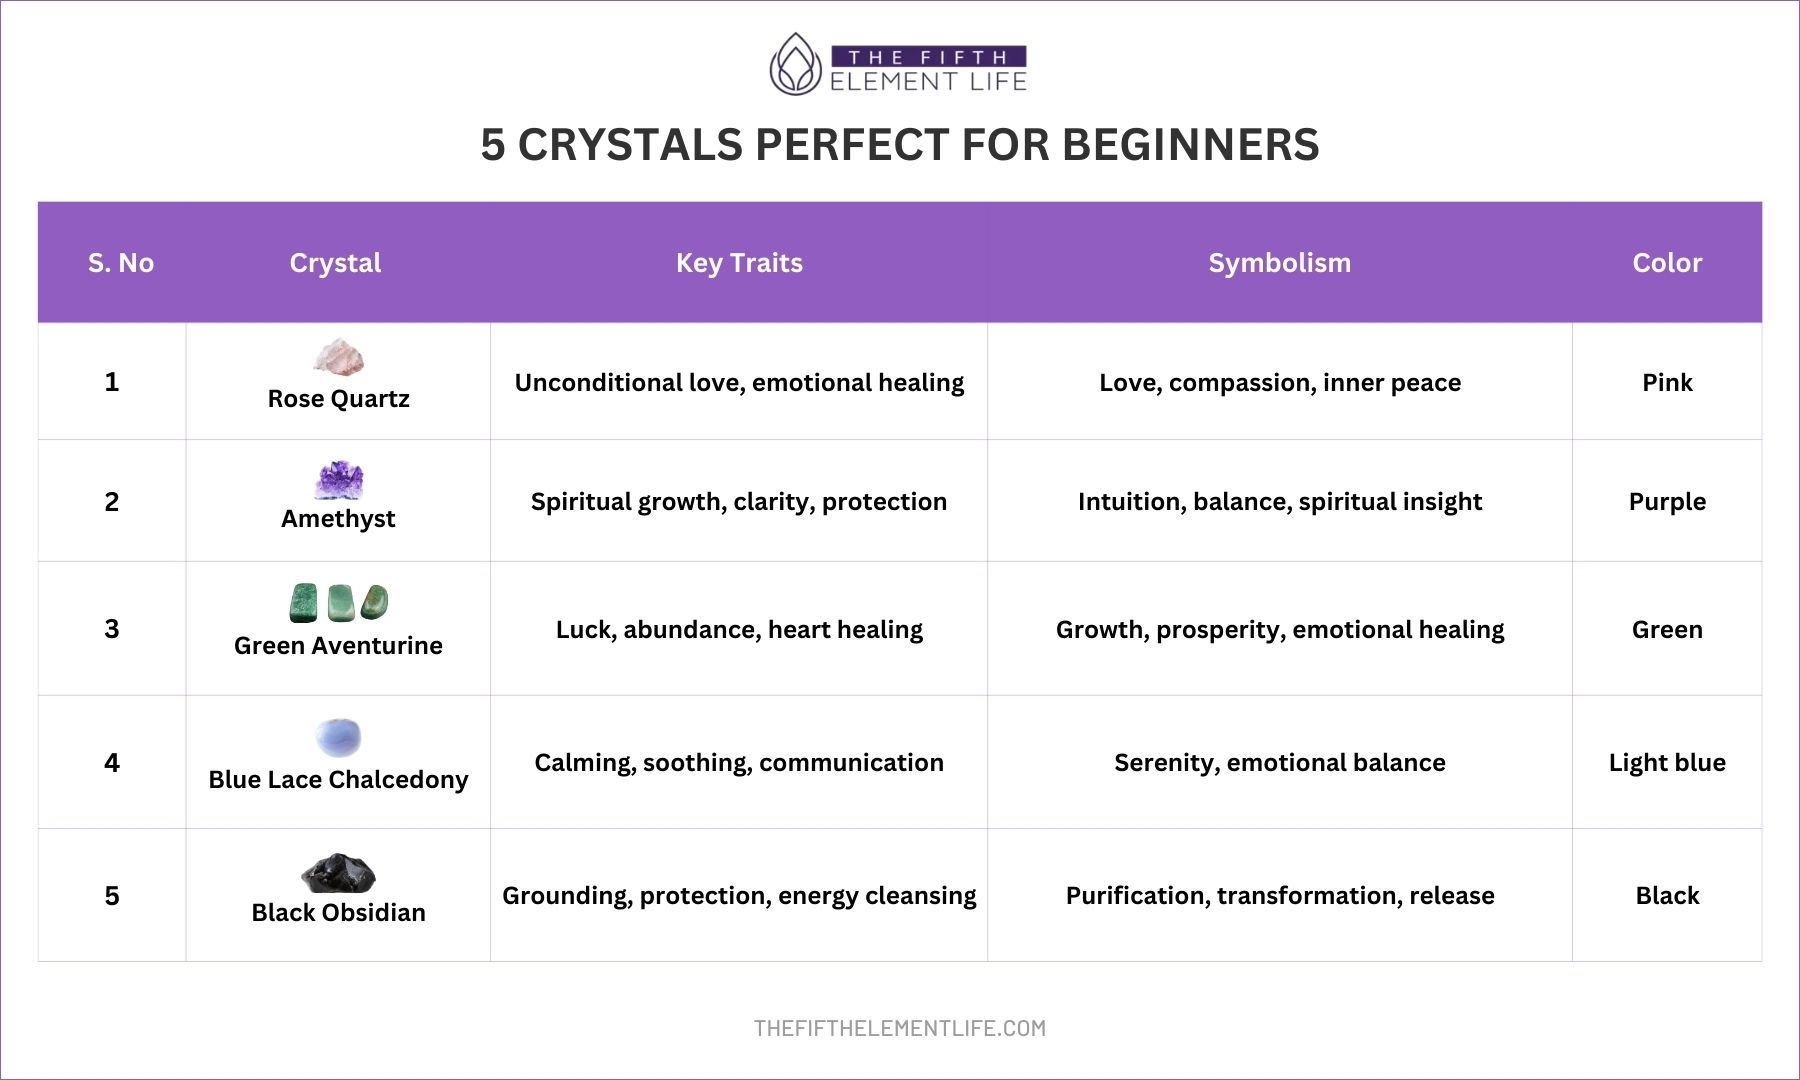 5 Crystals Perfect For Beginners